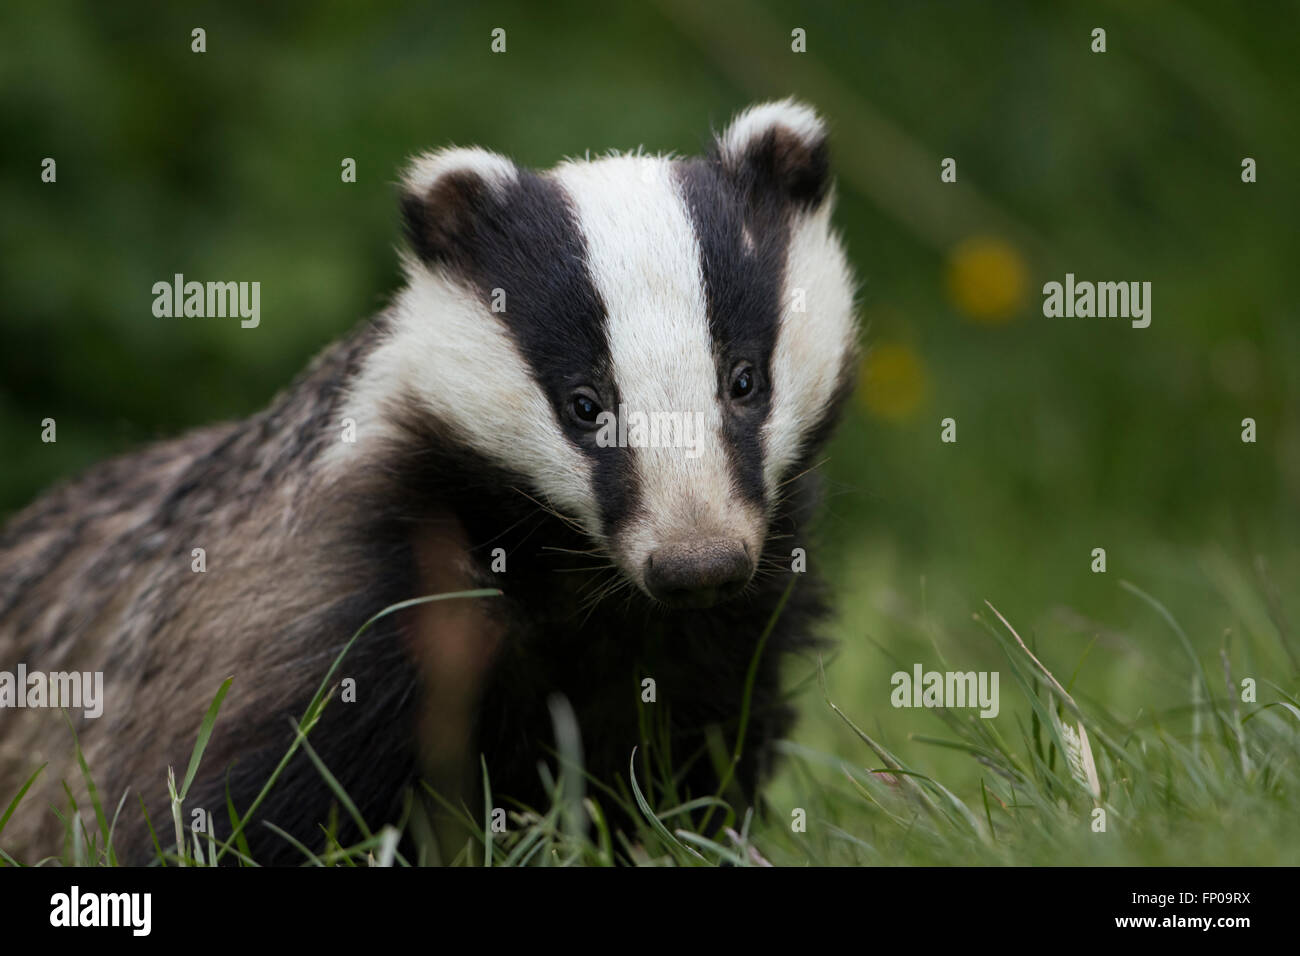 A Young Eurasian Badger (Meles meles) on a garden lawn looking directly at the viewer Stock Photo